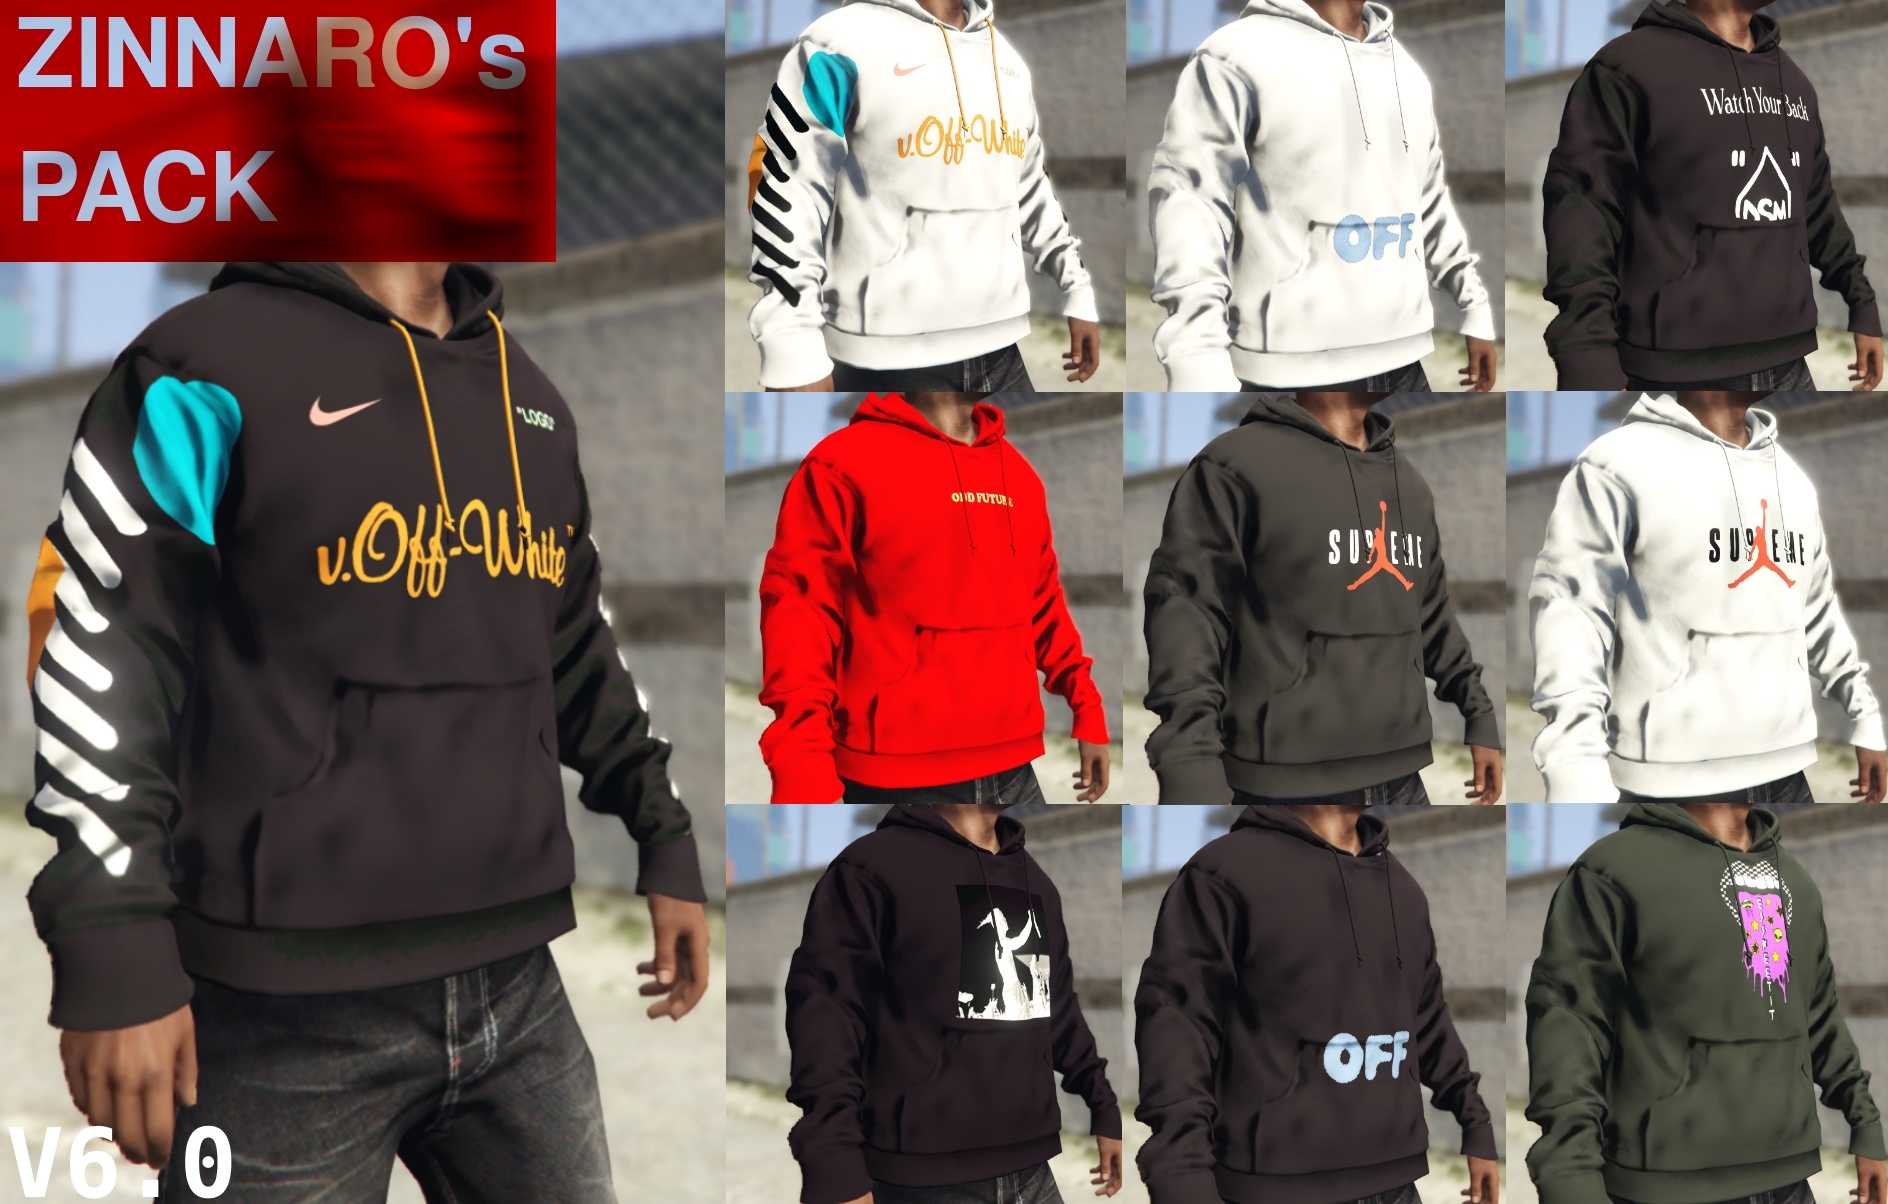 Hoodies Collection (Fila, Supreme, Gucci, ellesse, Lacoste, Trasher, OFF-WHITE, Dolce & Gabbana, Stranger Things, Nike Air, Champion, Comme des garçons, Palace, Kappa, Guess) 6.0